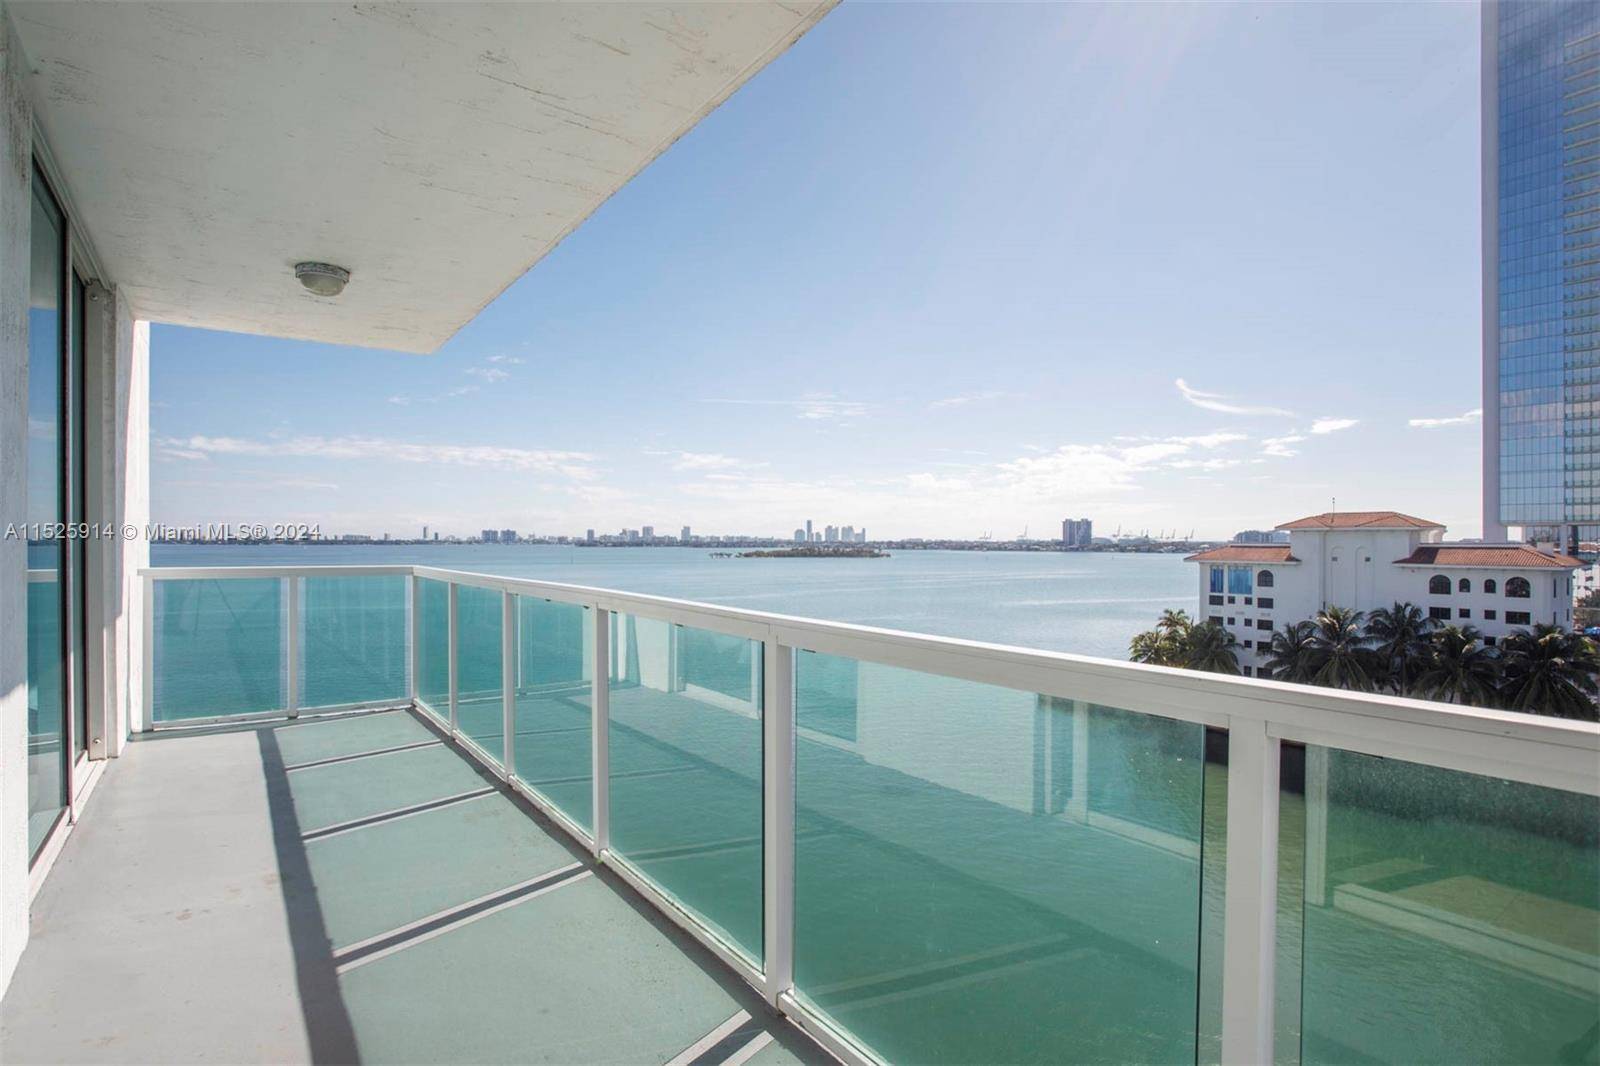 Immerse yourself in luxury with this spectacular SE corner 2 bedroom, 2 bathroom residence featuring panoramic bay views and a spacious balcony.